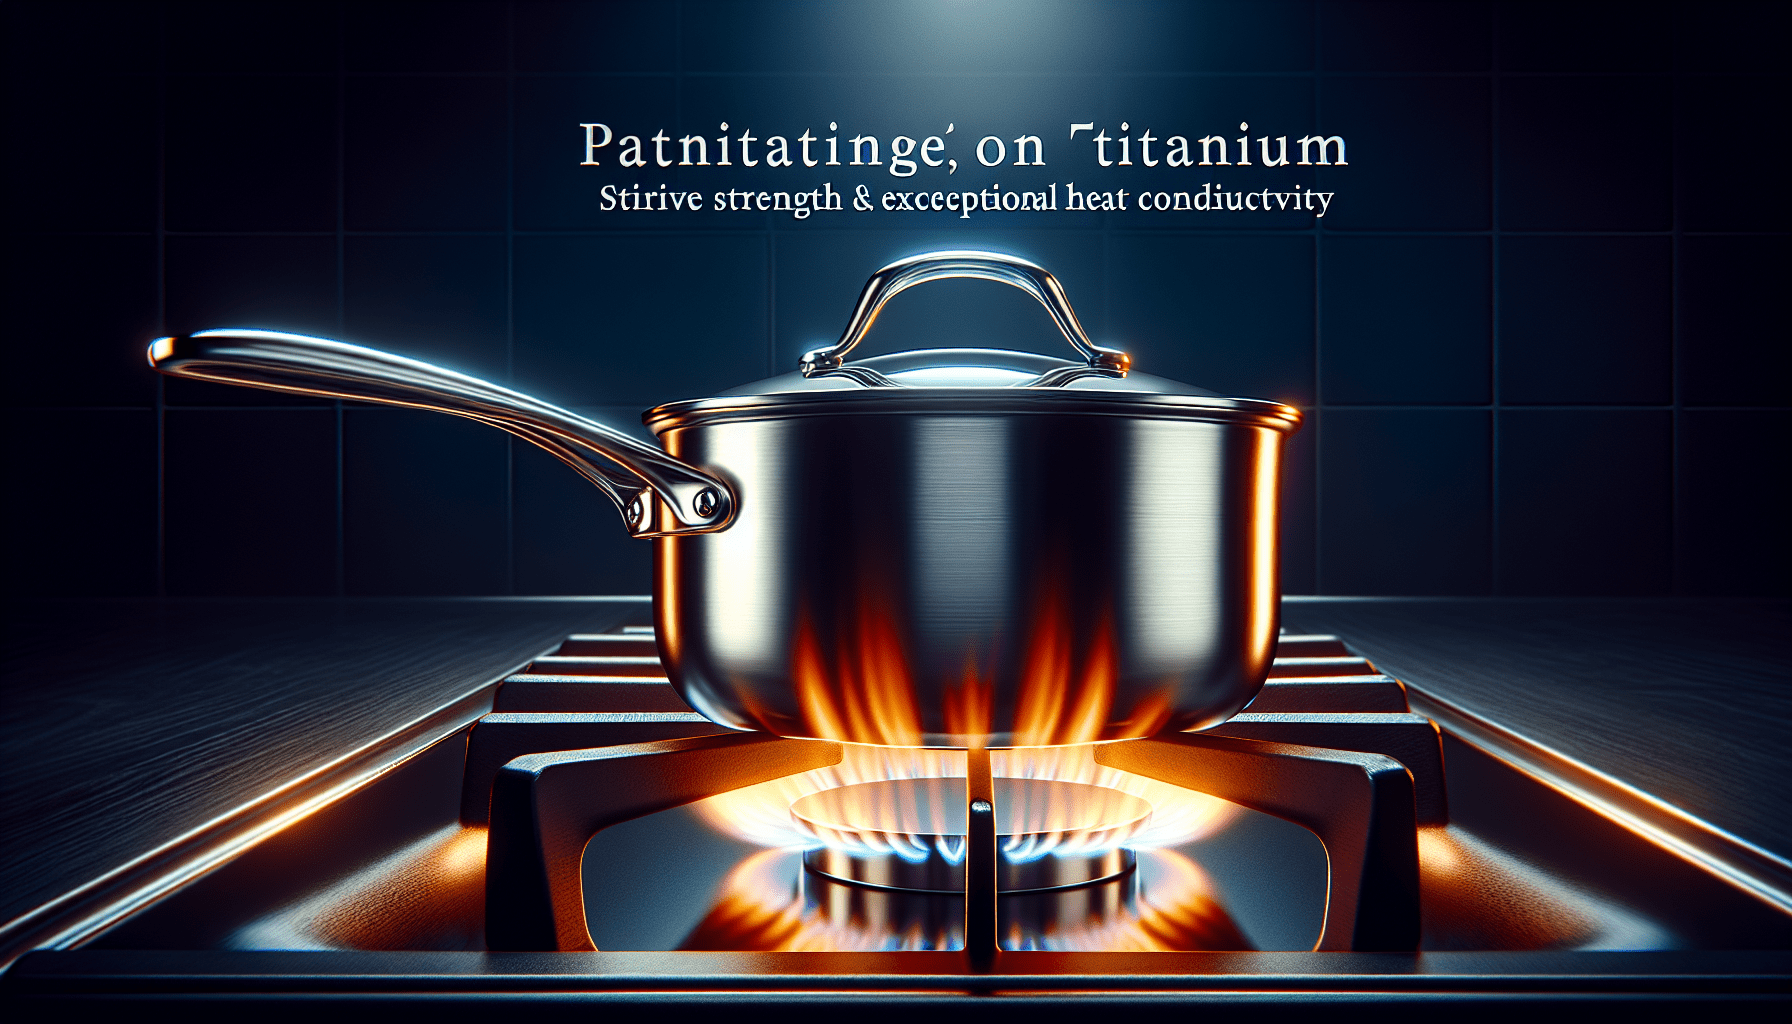 Can You Cook On Titanium?